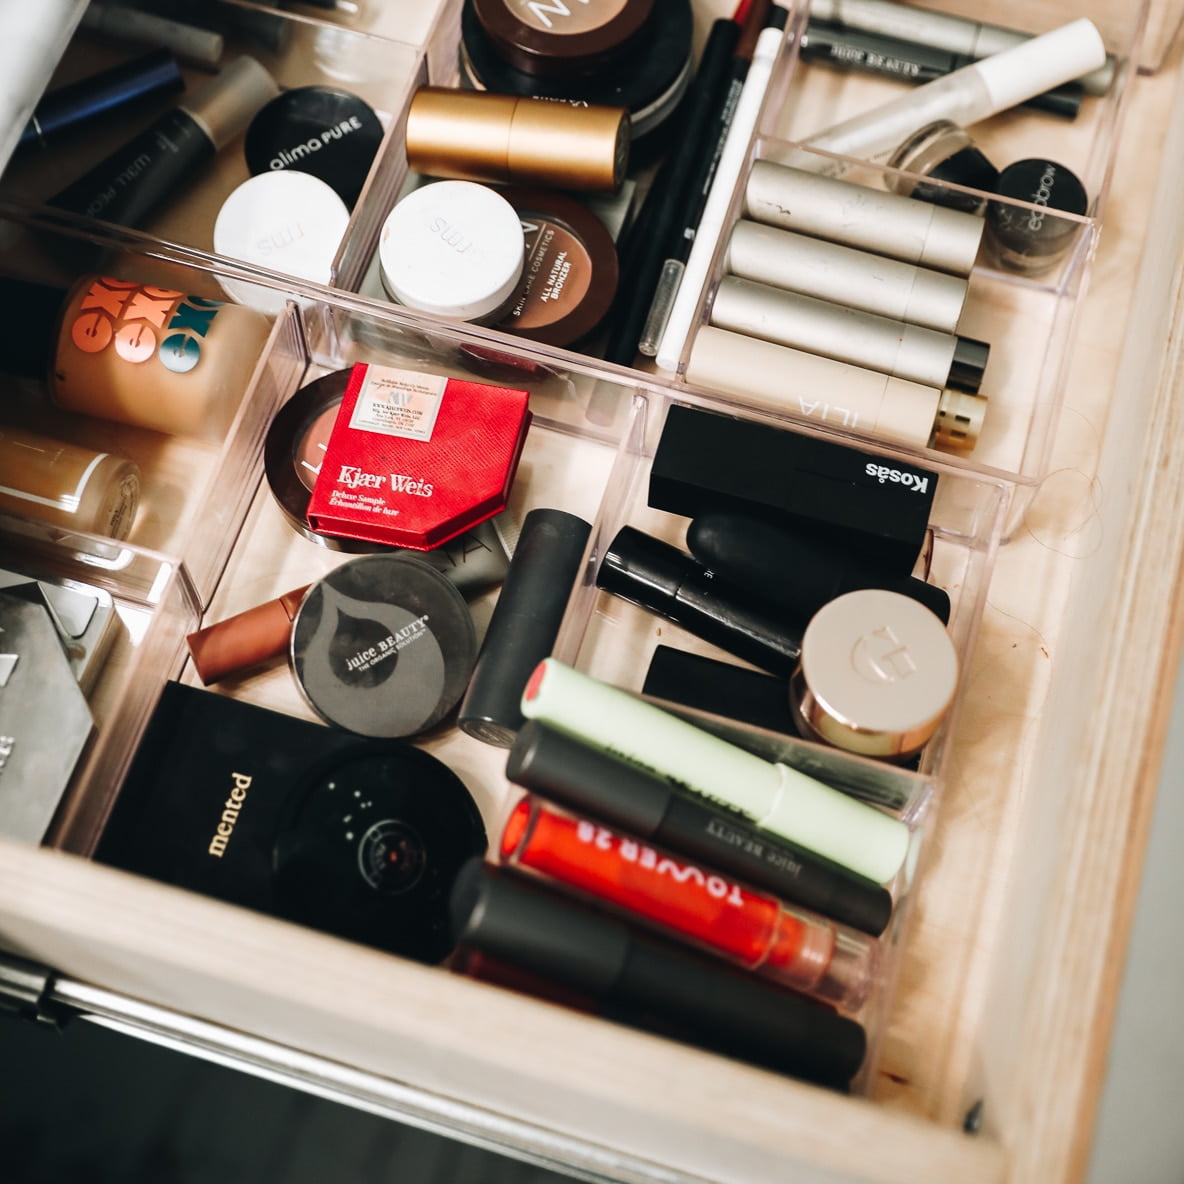 How to Recycle Beauty Products [From a Sustainability Expert] - The Healthy Maven